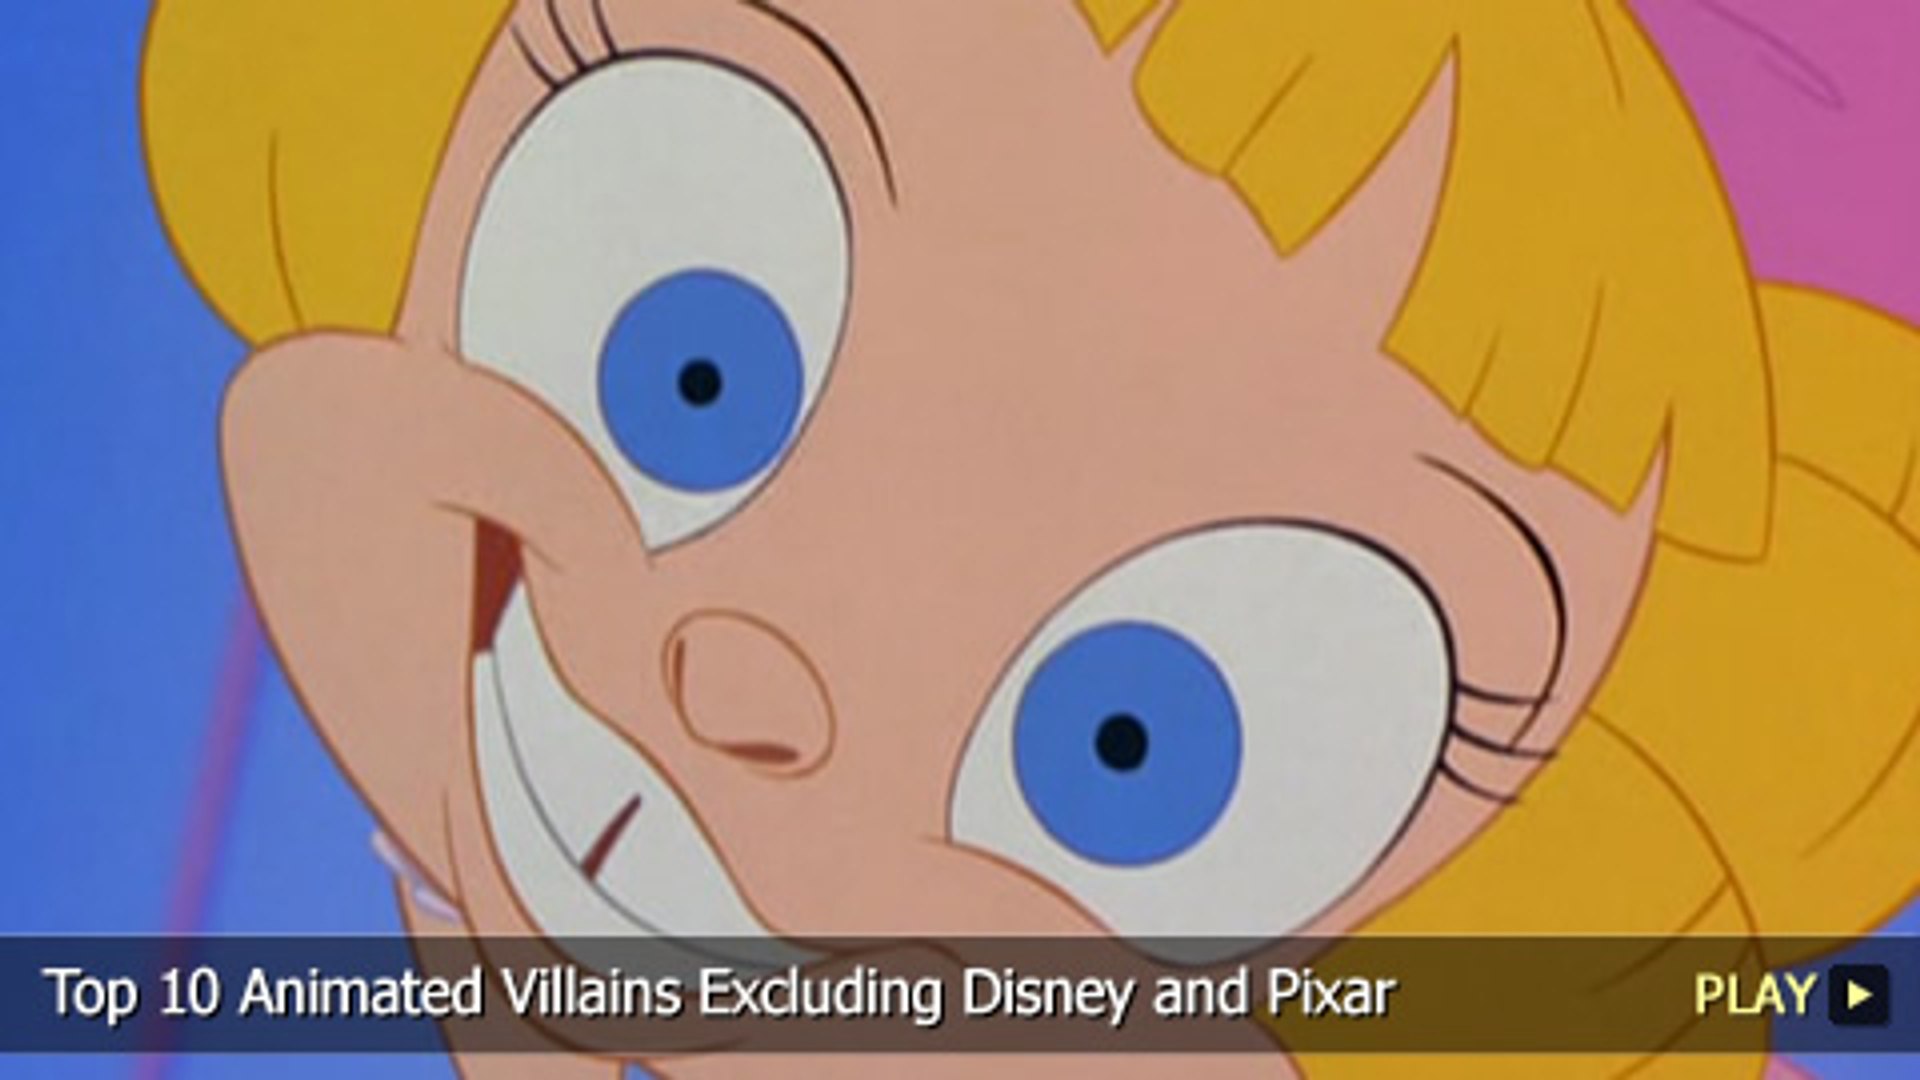 Top 10 Animated Villains Excluding Disney and Pixar - video Dailymotion